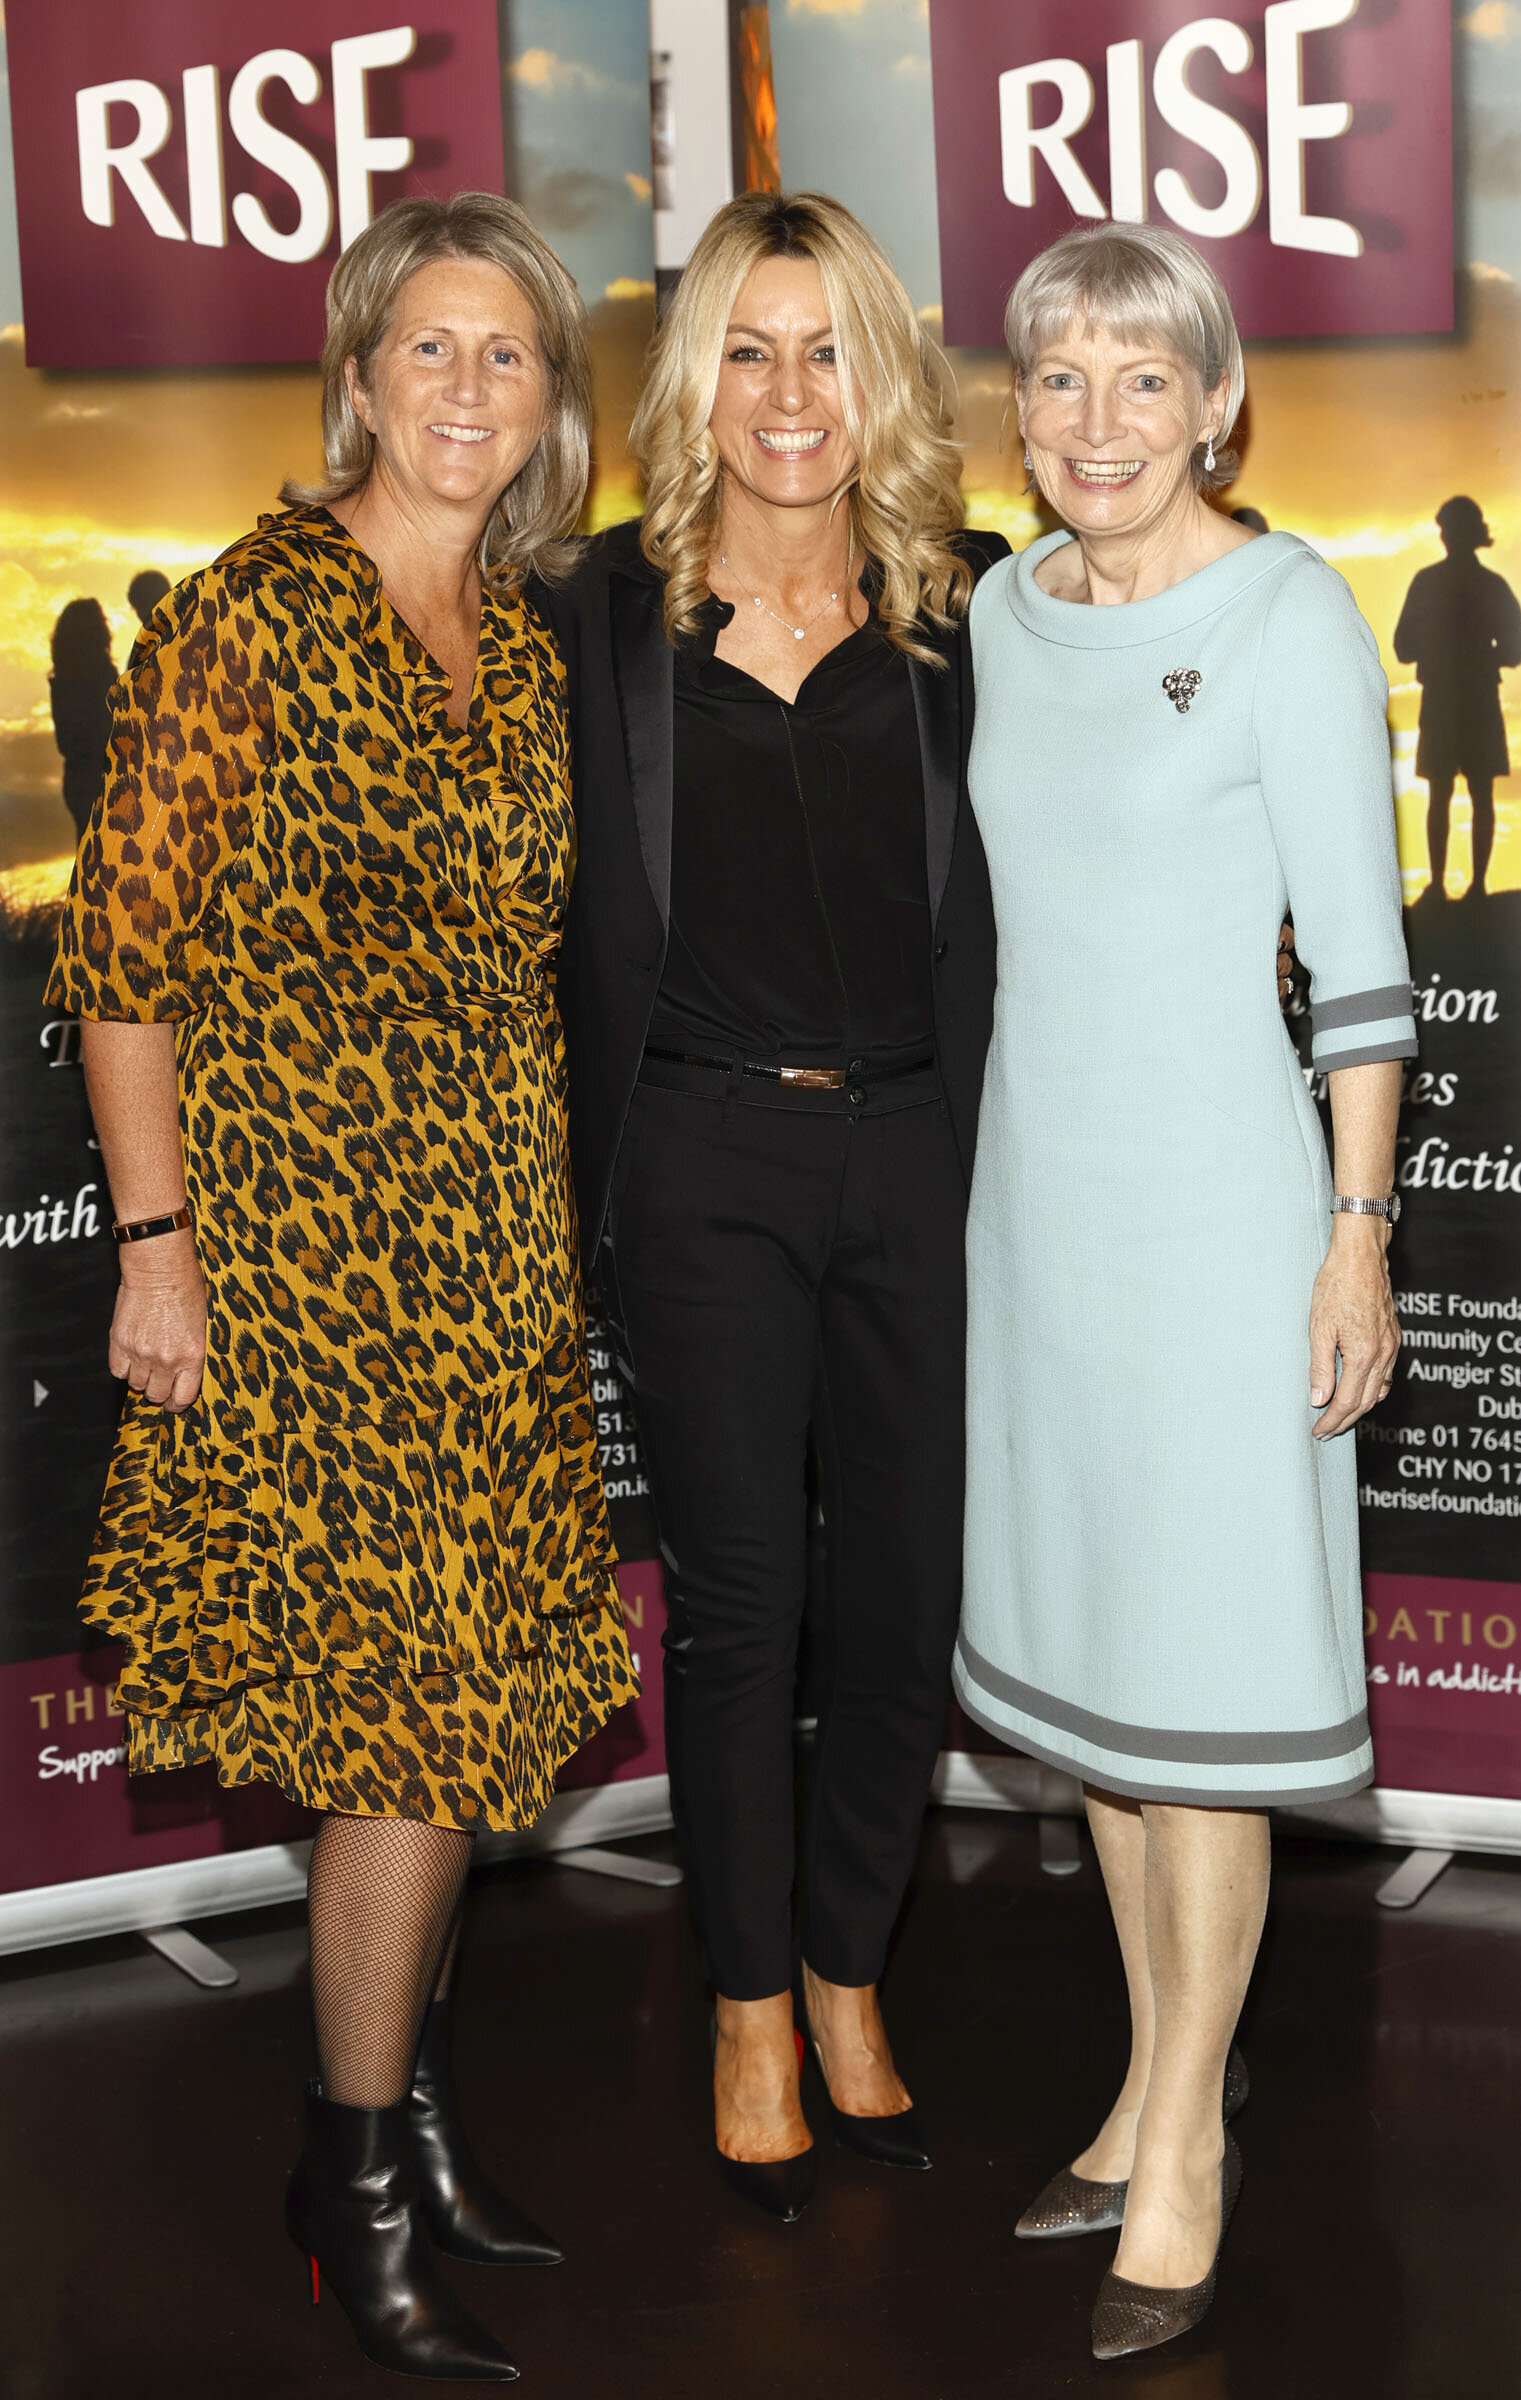 Karen Hodgins, Helga Hayden Smyth and Helen O'Sullivan Dwyer at the Friends of Rise inaugural lunch in aid of The RISE Foundation.jpg